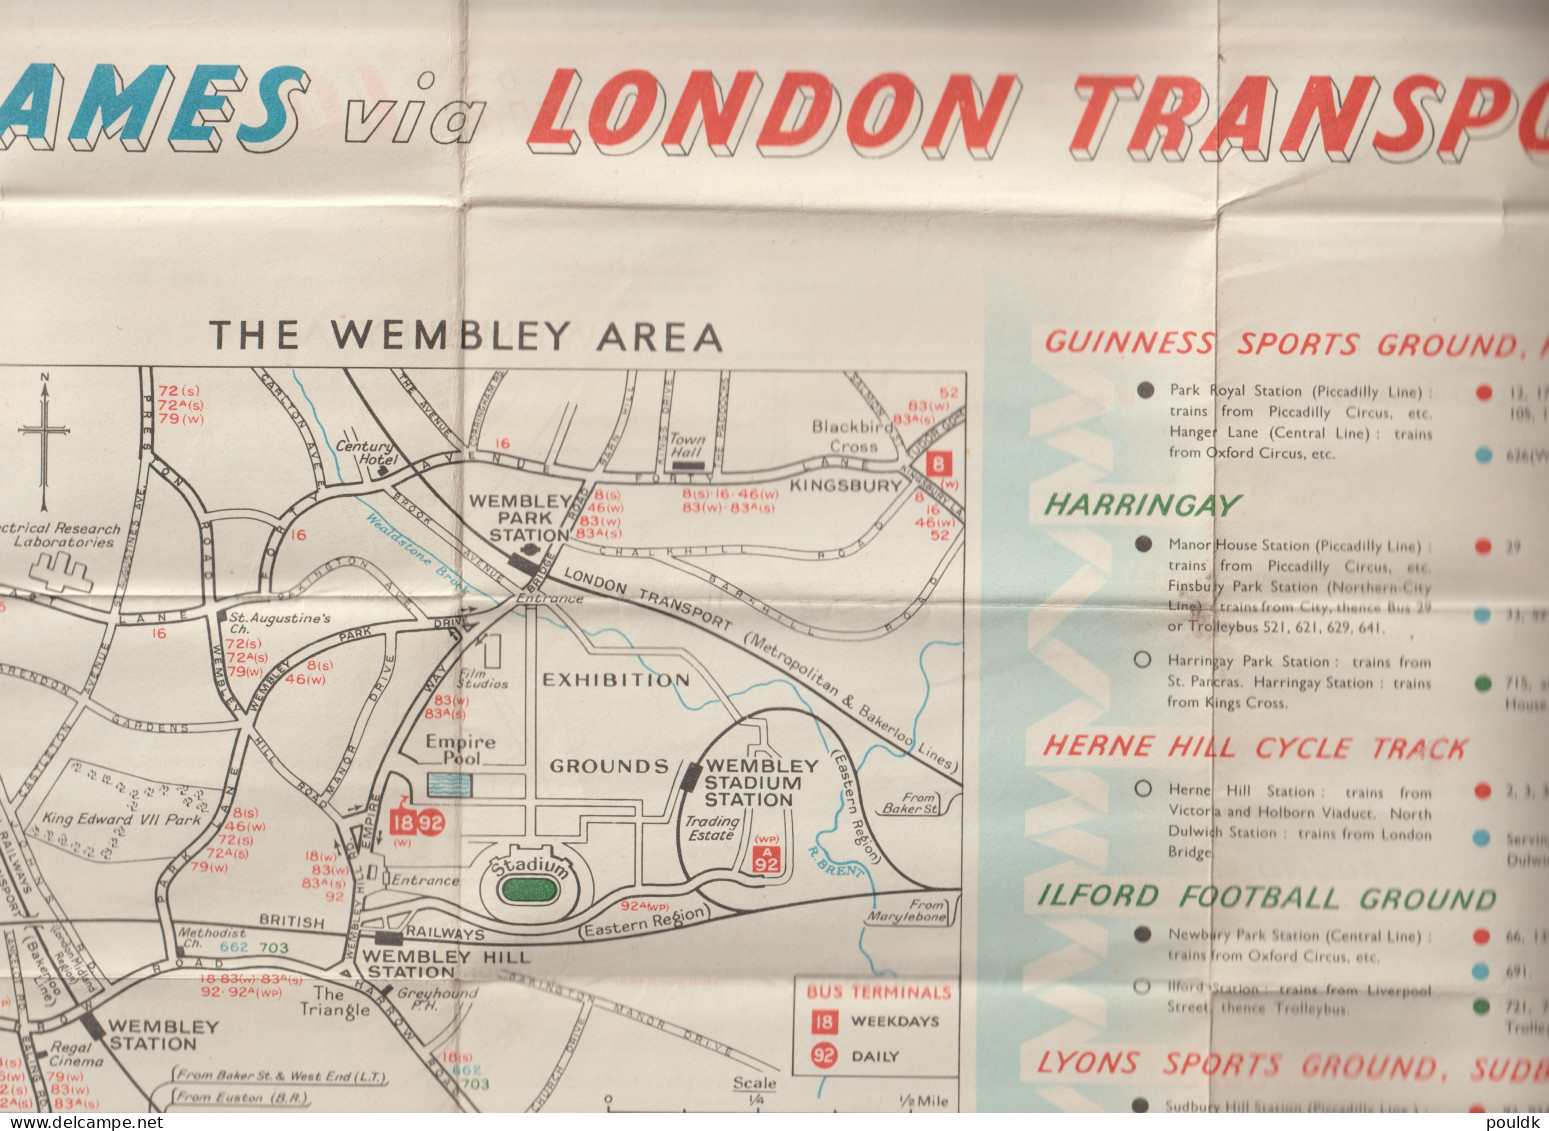 Olympic Games London 1948 - How To Get There By London Transport. Folded Map W/transport Informations. Postal  - Verano 1948: Londres